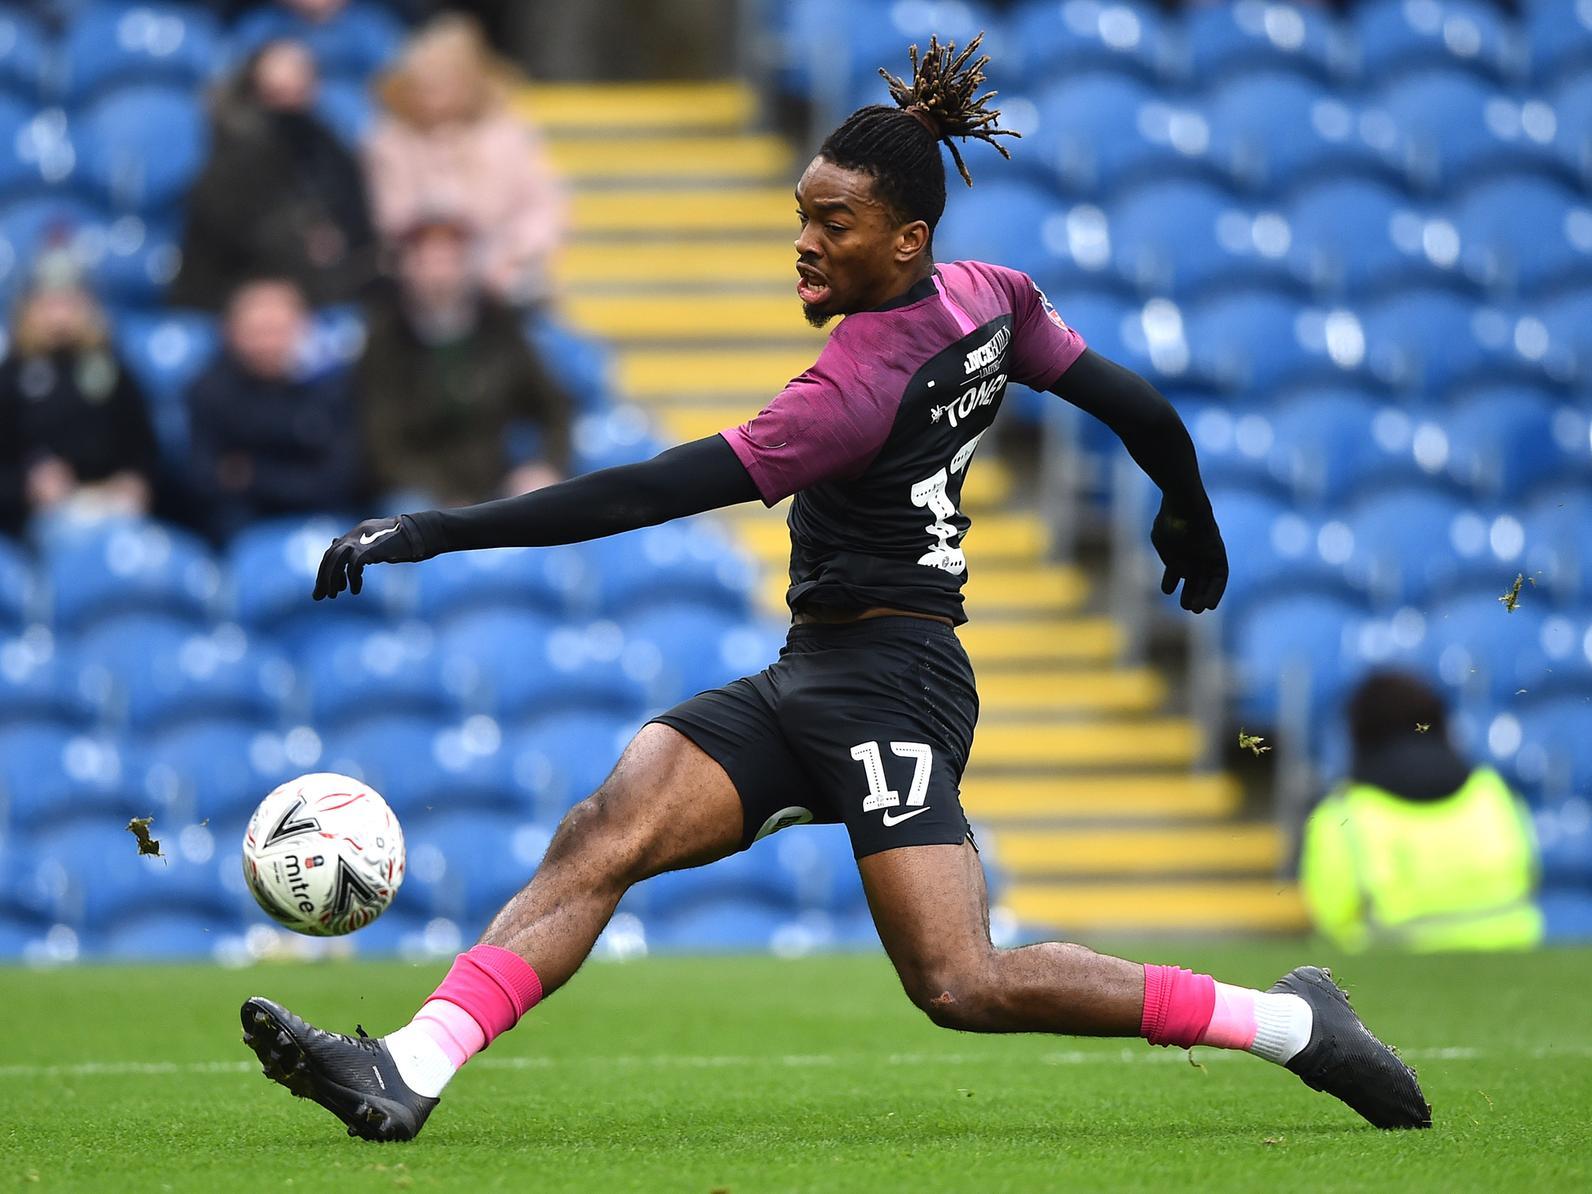 Newcastle United could benefit financially from the sale of Ivan Toney, if the striker leaves Peterborough United for a fee during this window. (Various)